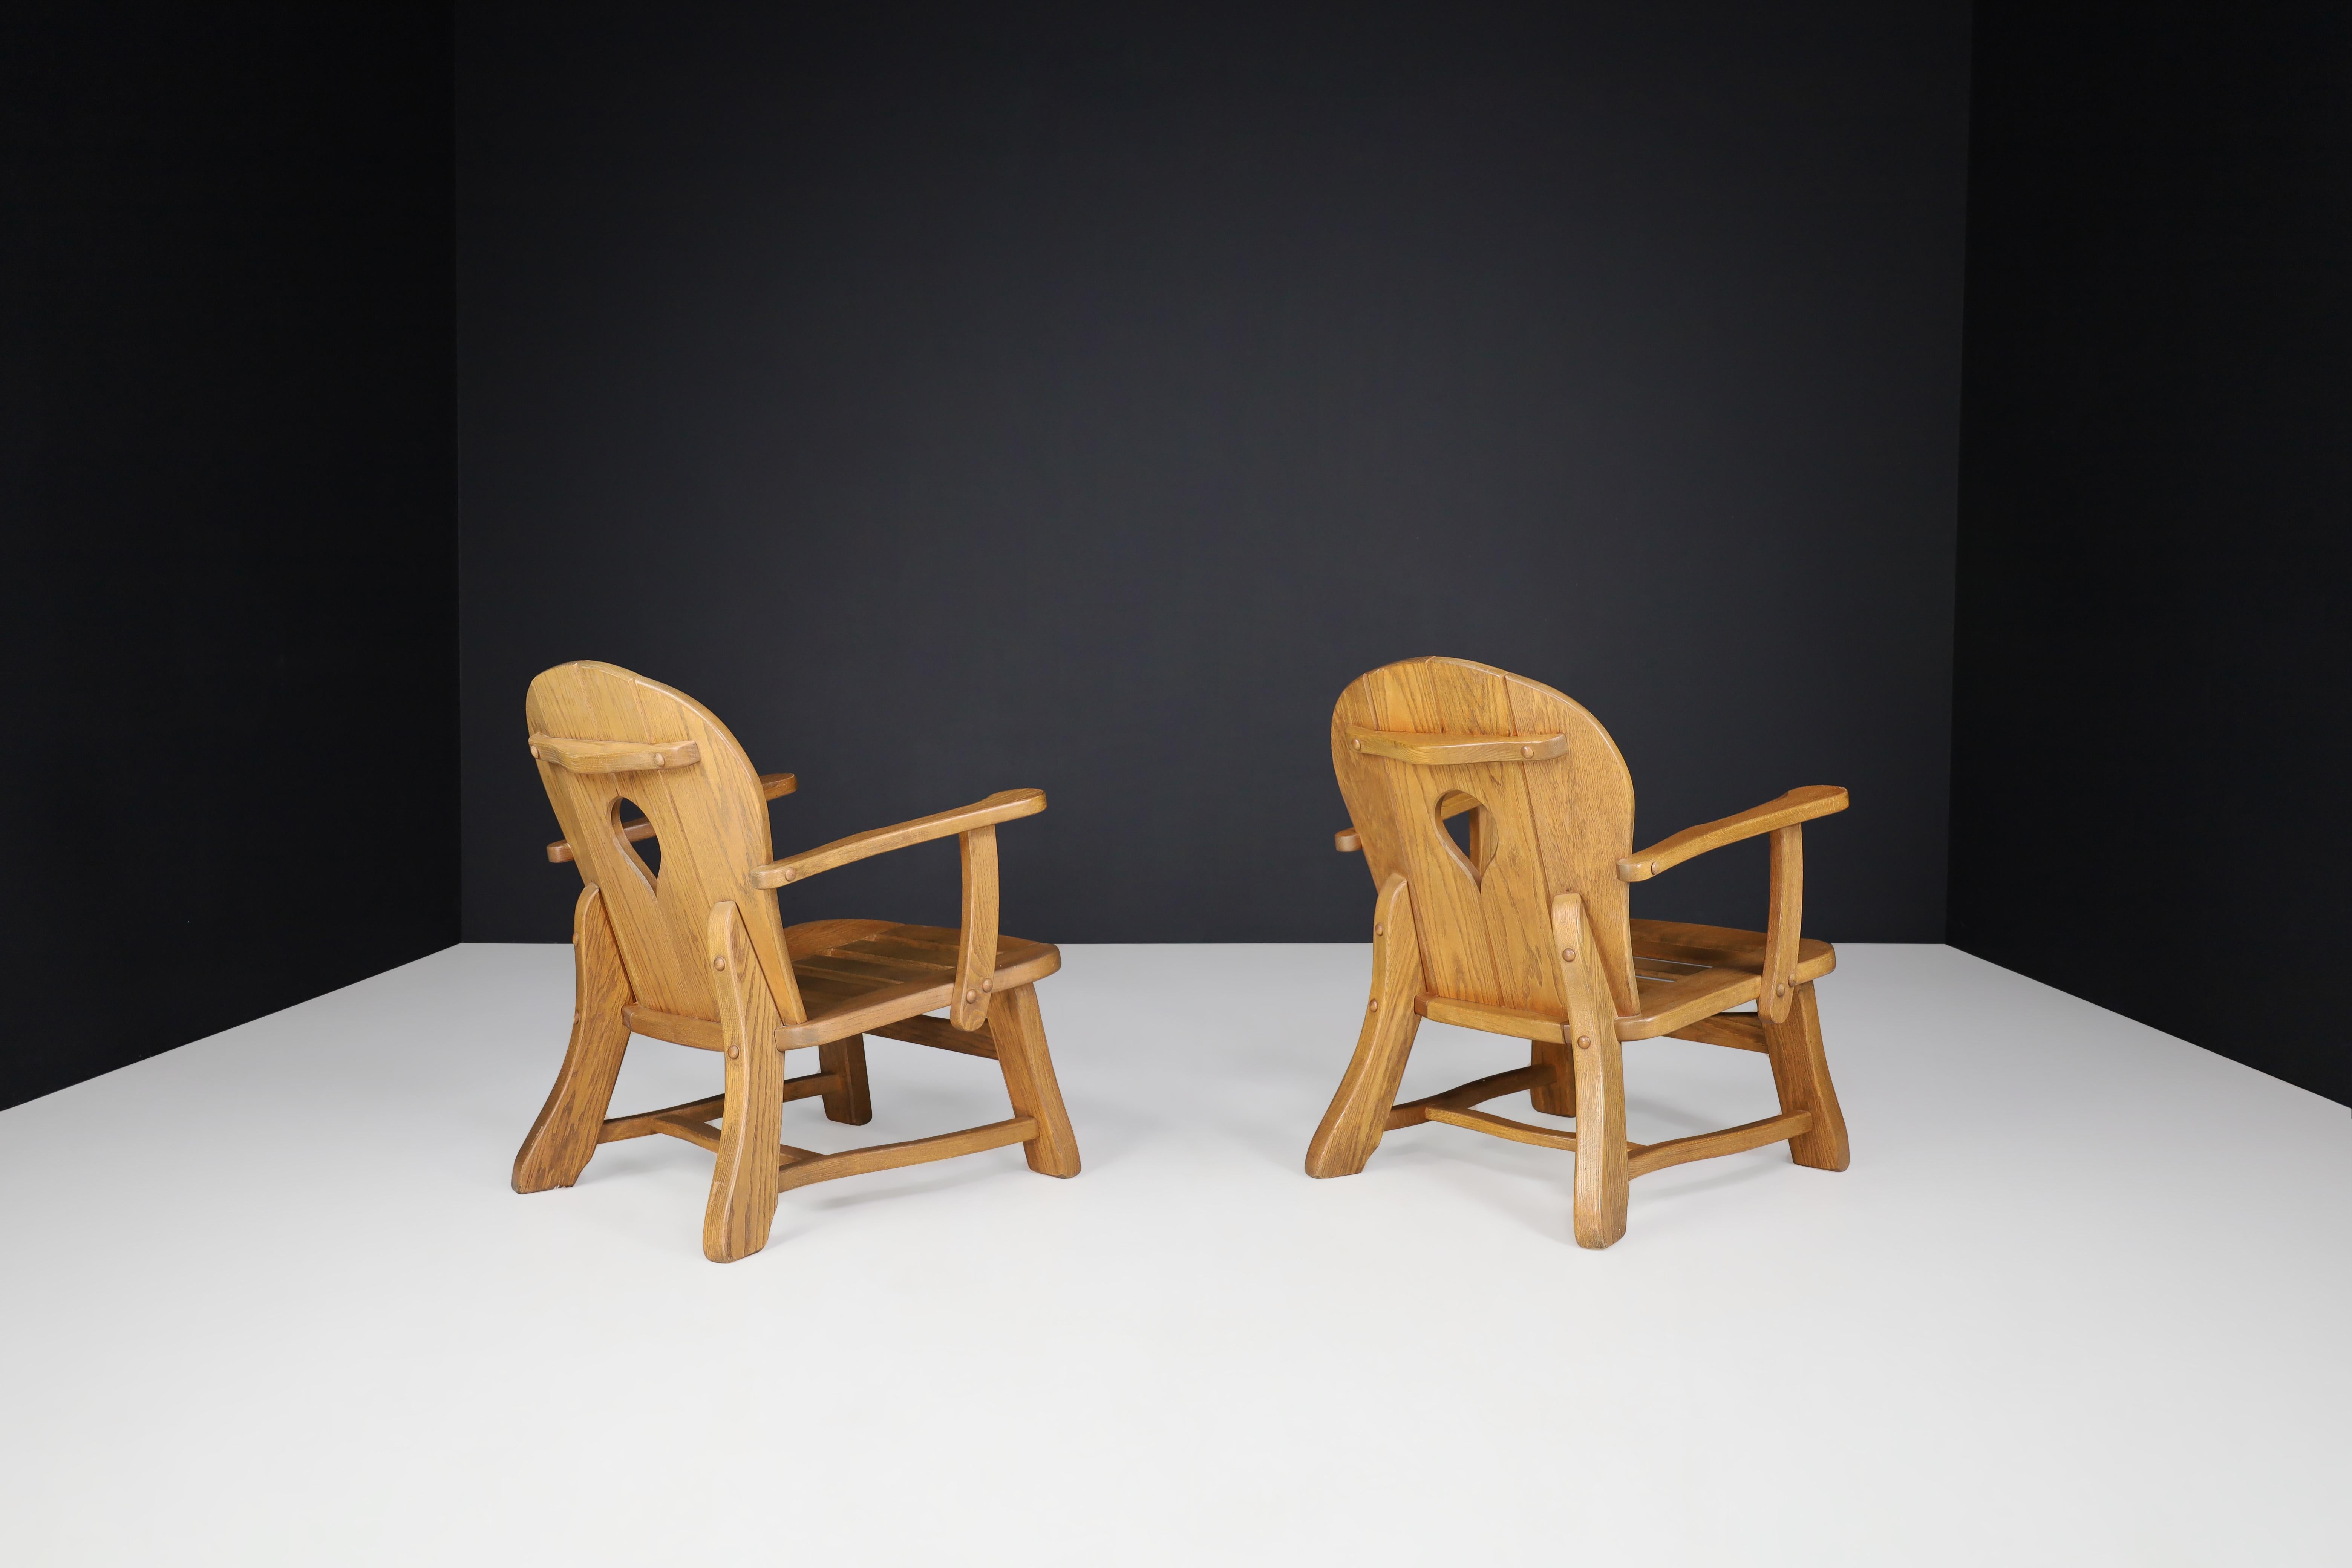 Sculptural Lounge Chairs in Oak, France, 1960s For Sale 5